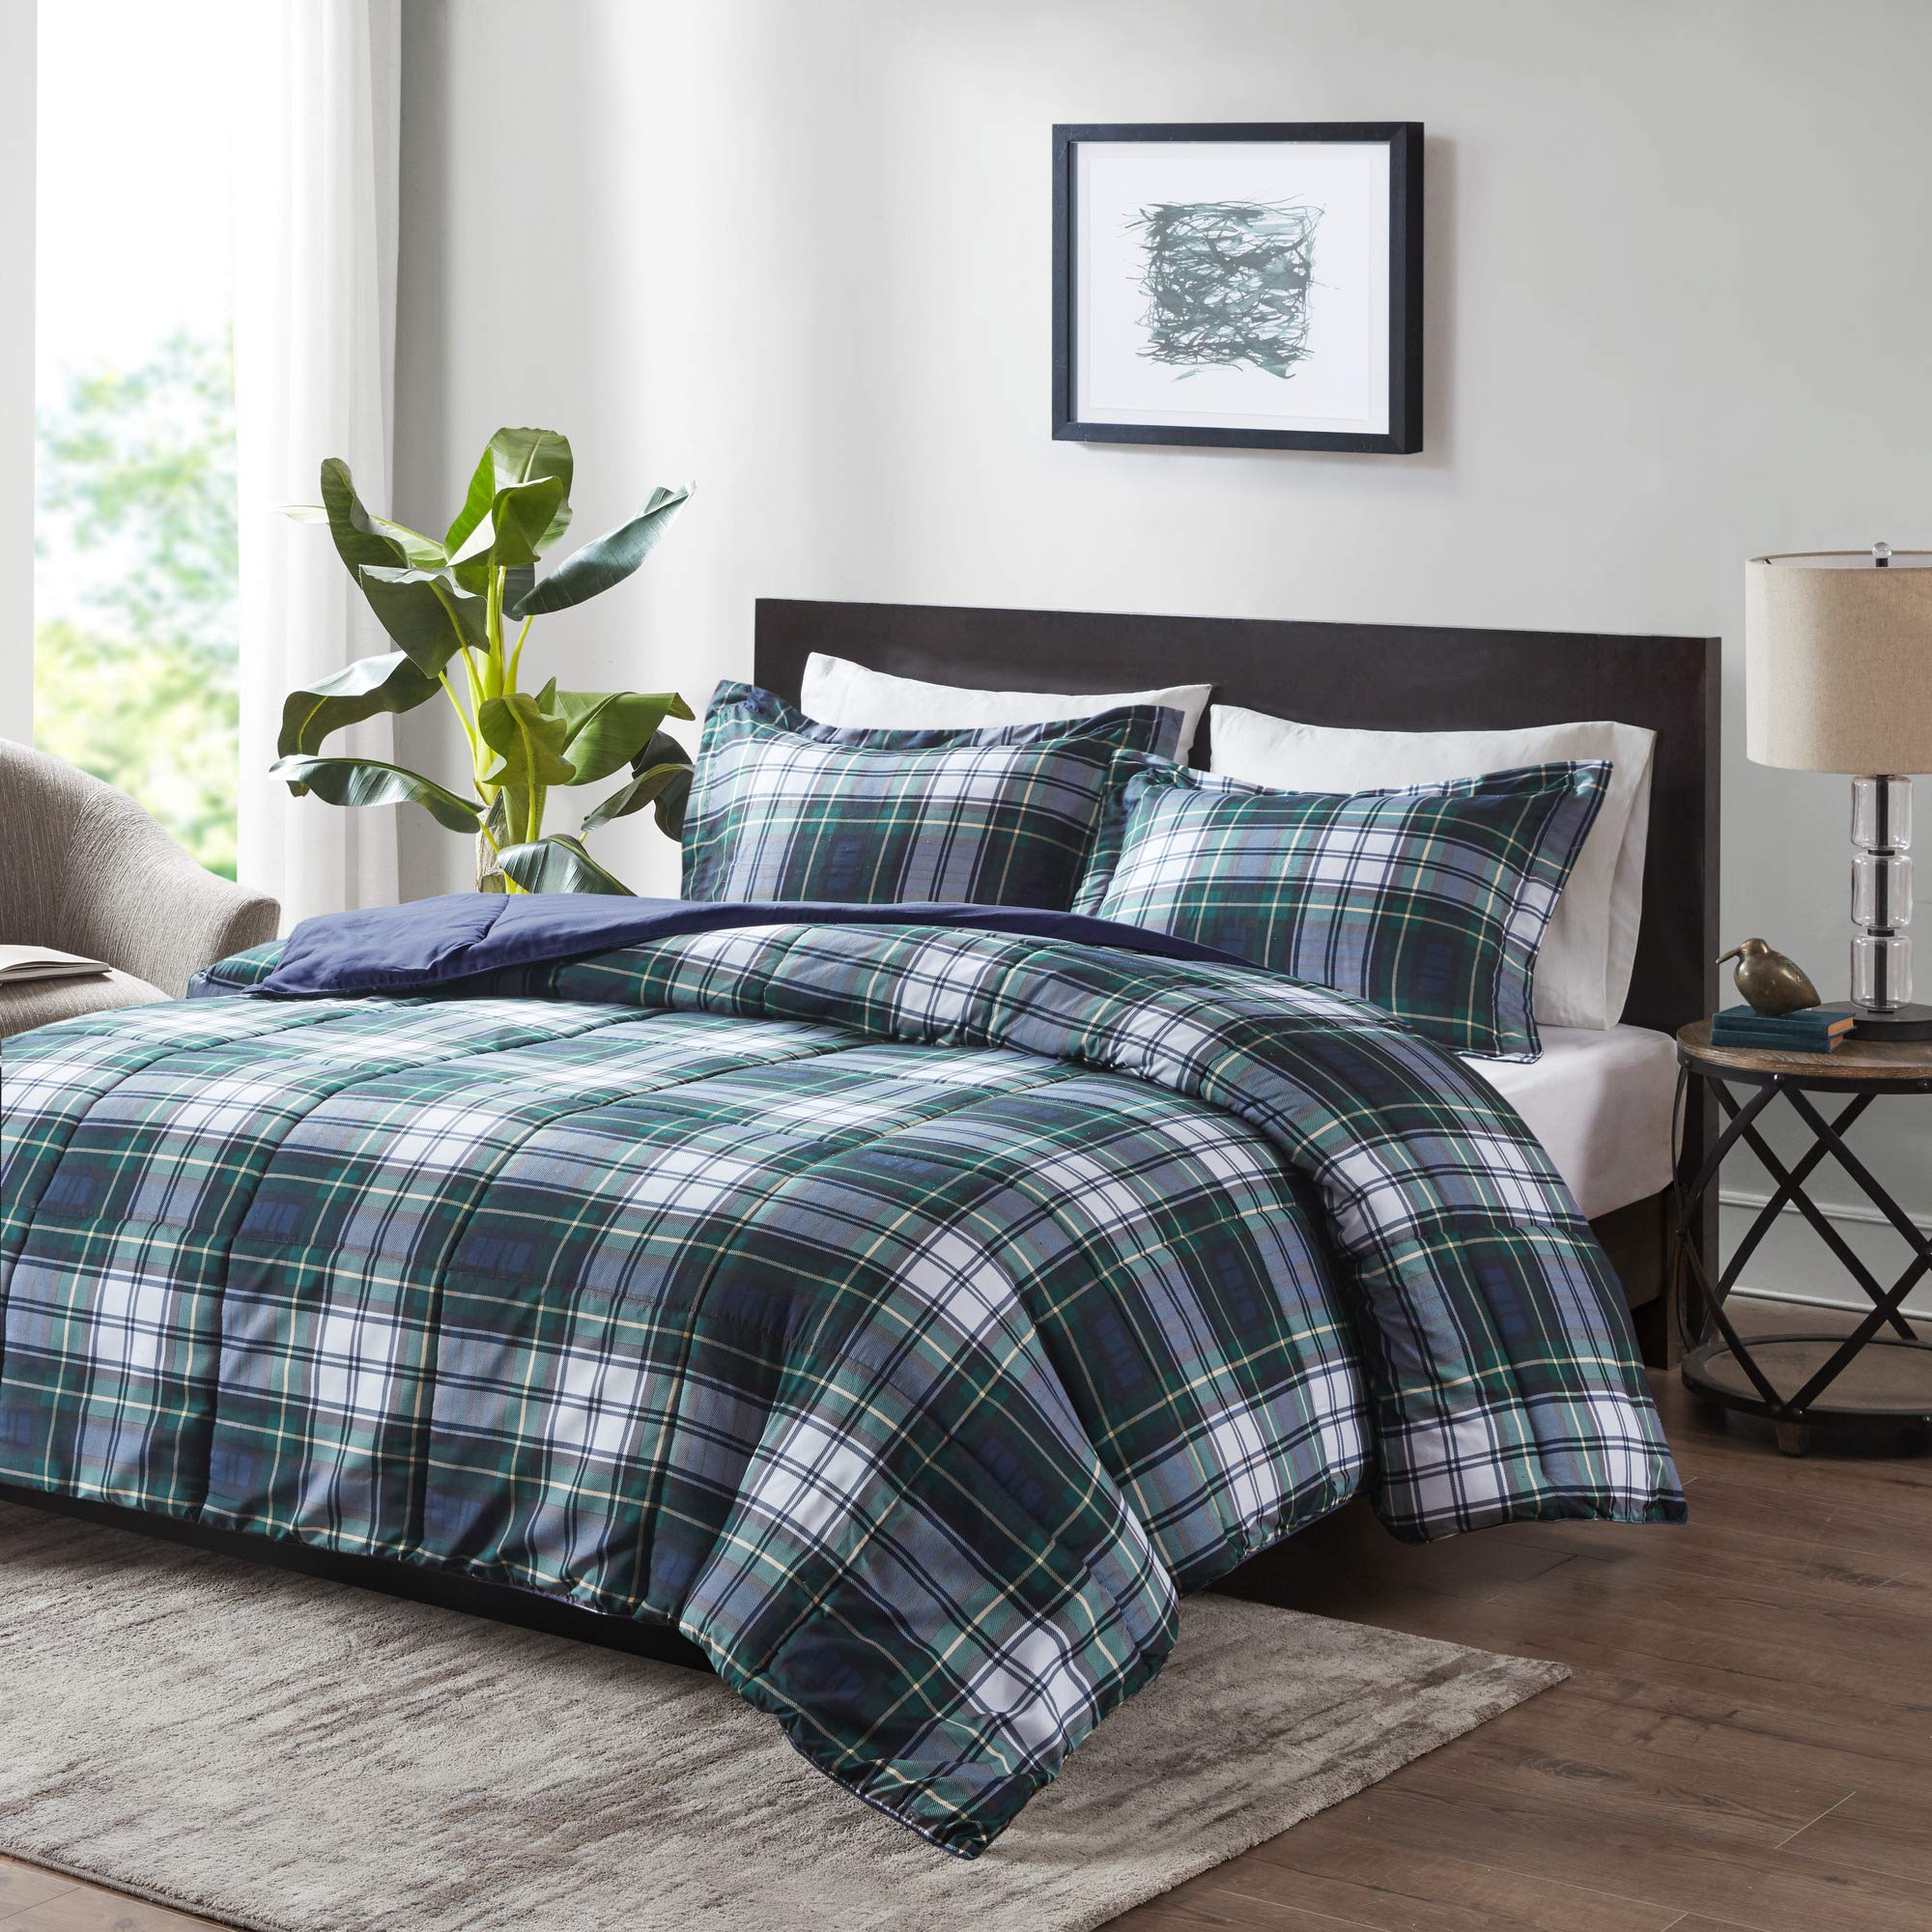 Book Cover Madison Park Essentials Parkston Plaid Comforter, Matching Sham, 3M Scotchguard Stain Release Cover, Hypoallergenic All Season Bedding-Set, Twin/TwinXL, Navy, 2 Piece Navy Twin/Twin XL